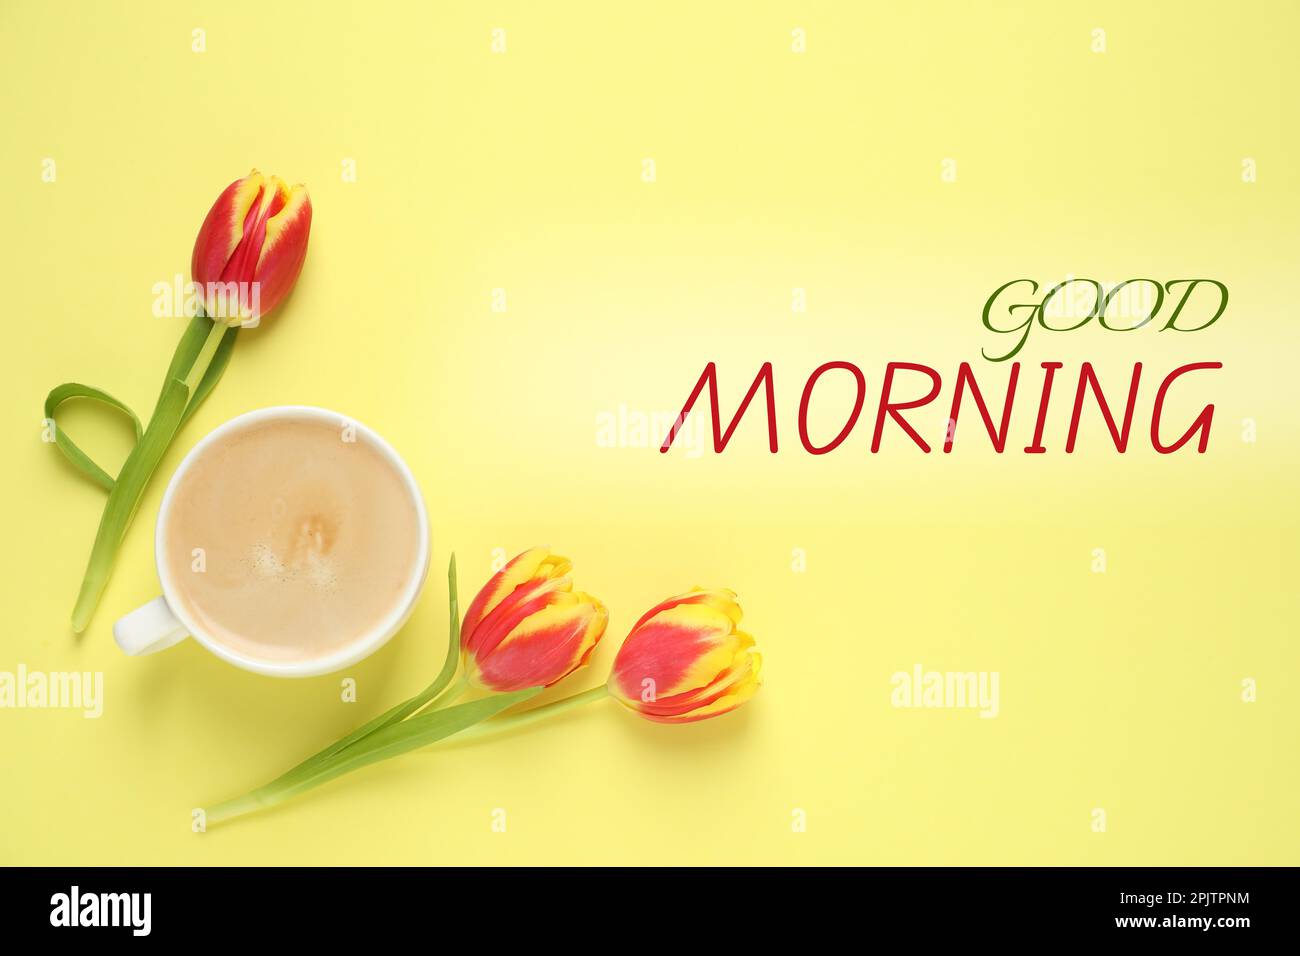 https://c8.alamy.com/comp/2PJTPNM/good-morning!-cup-of-coffee-and-tulips-on-yellow-background-flat-lay-2PJTPNM.jpg